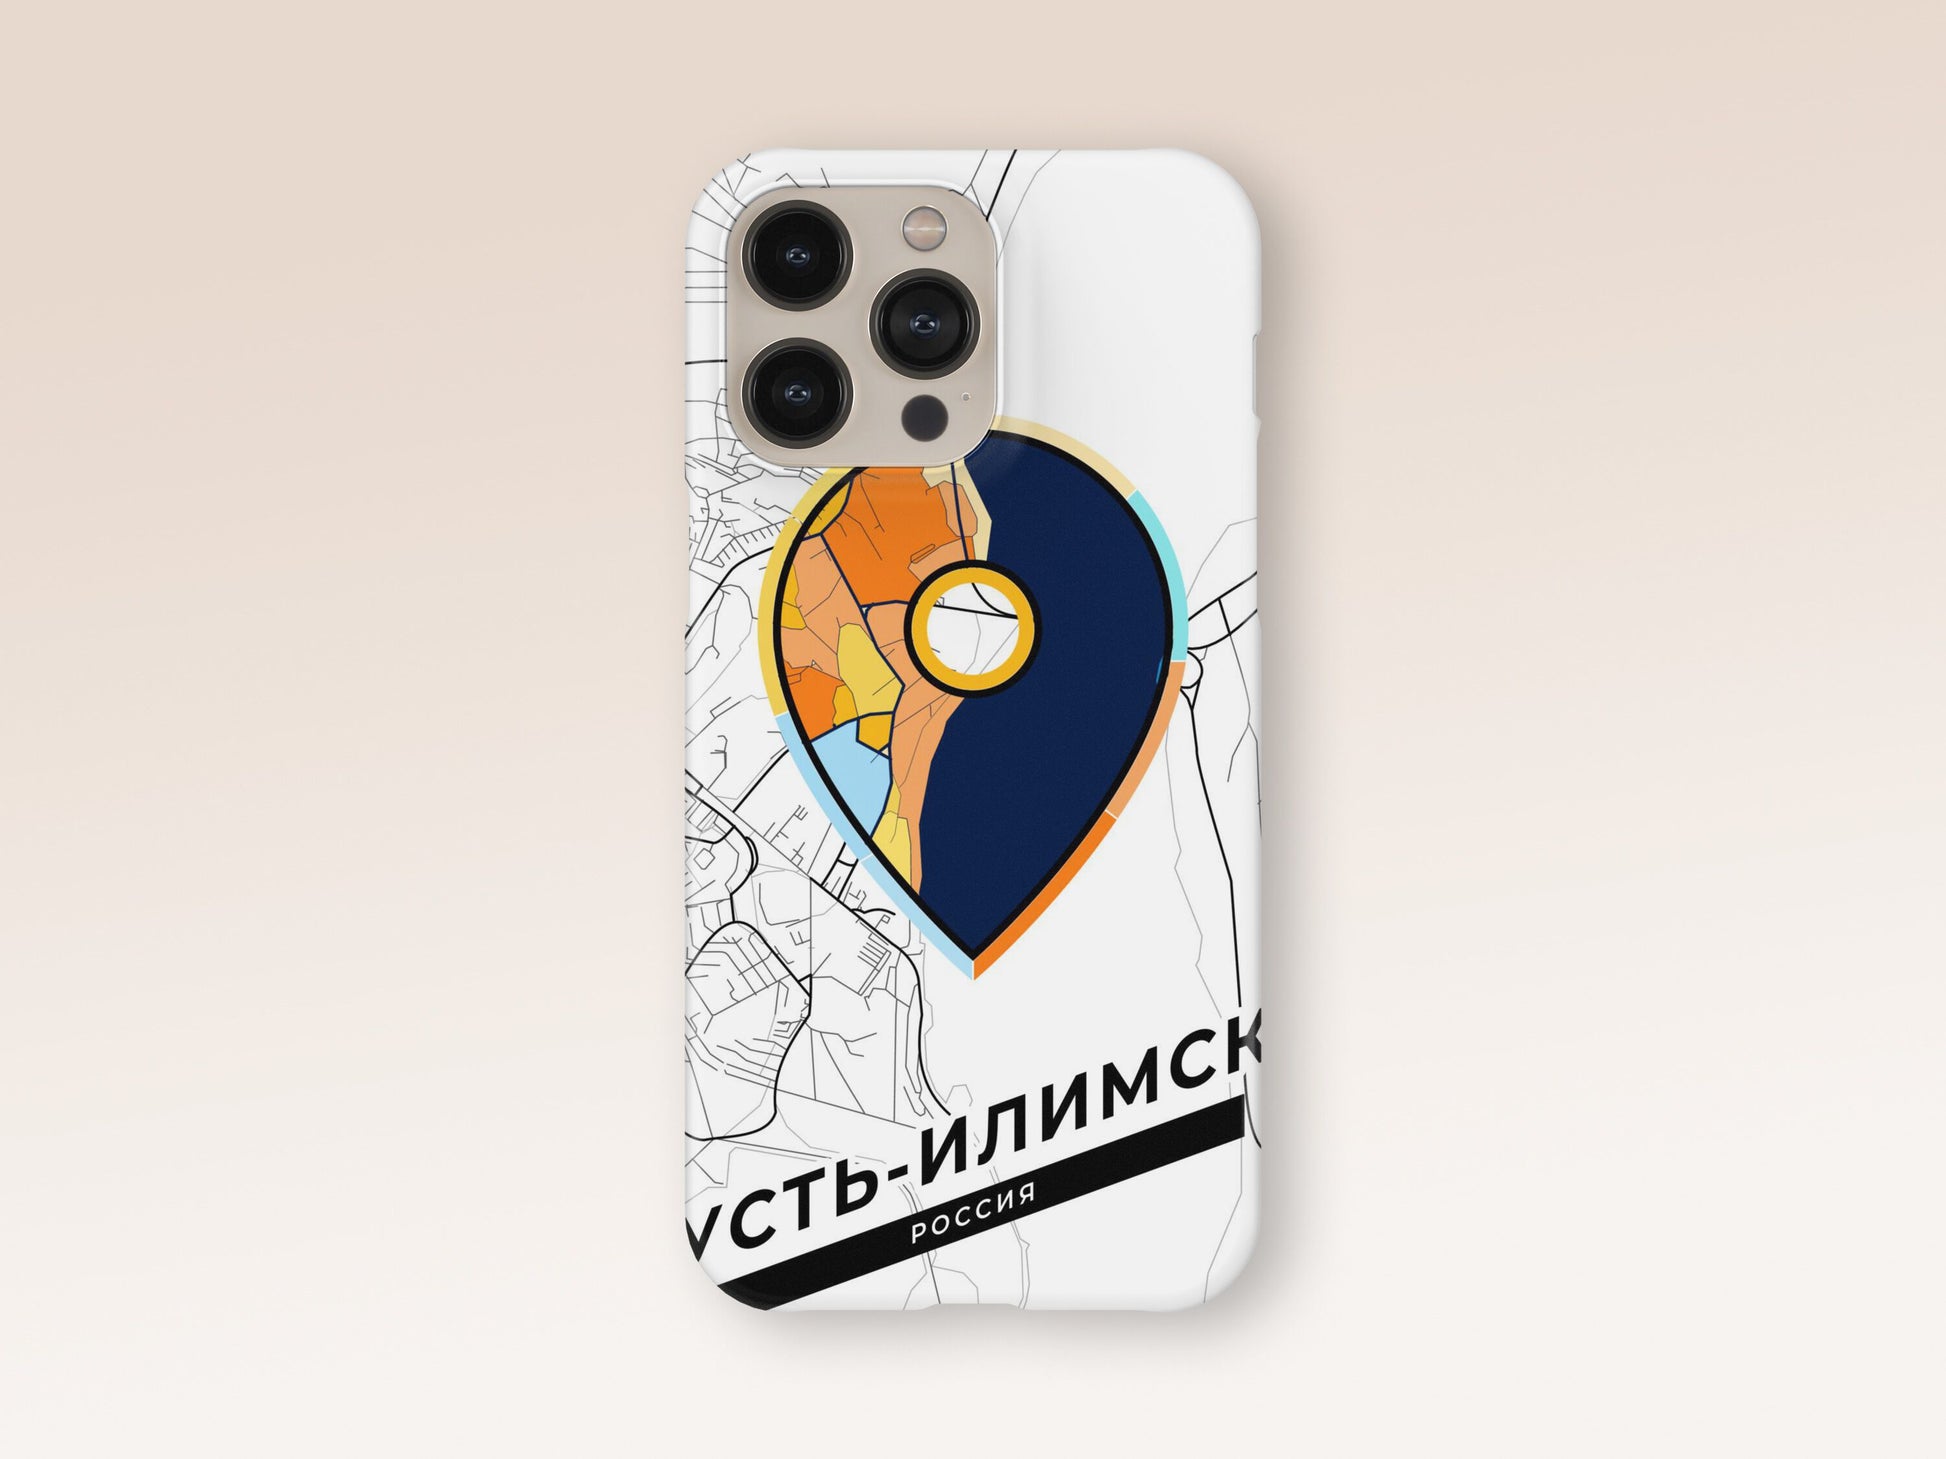 Ust-Ilimsk Russia slim phone case with colorful icon 1